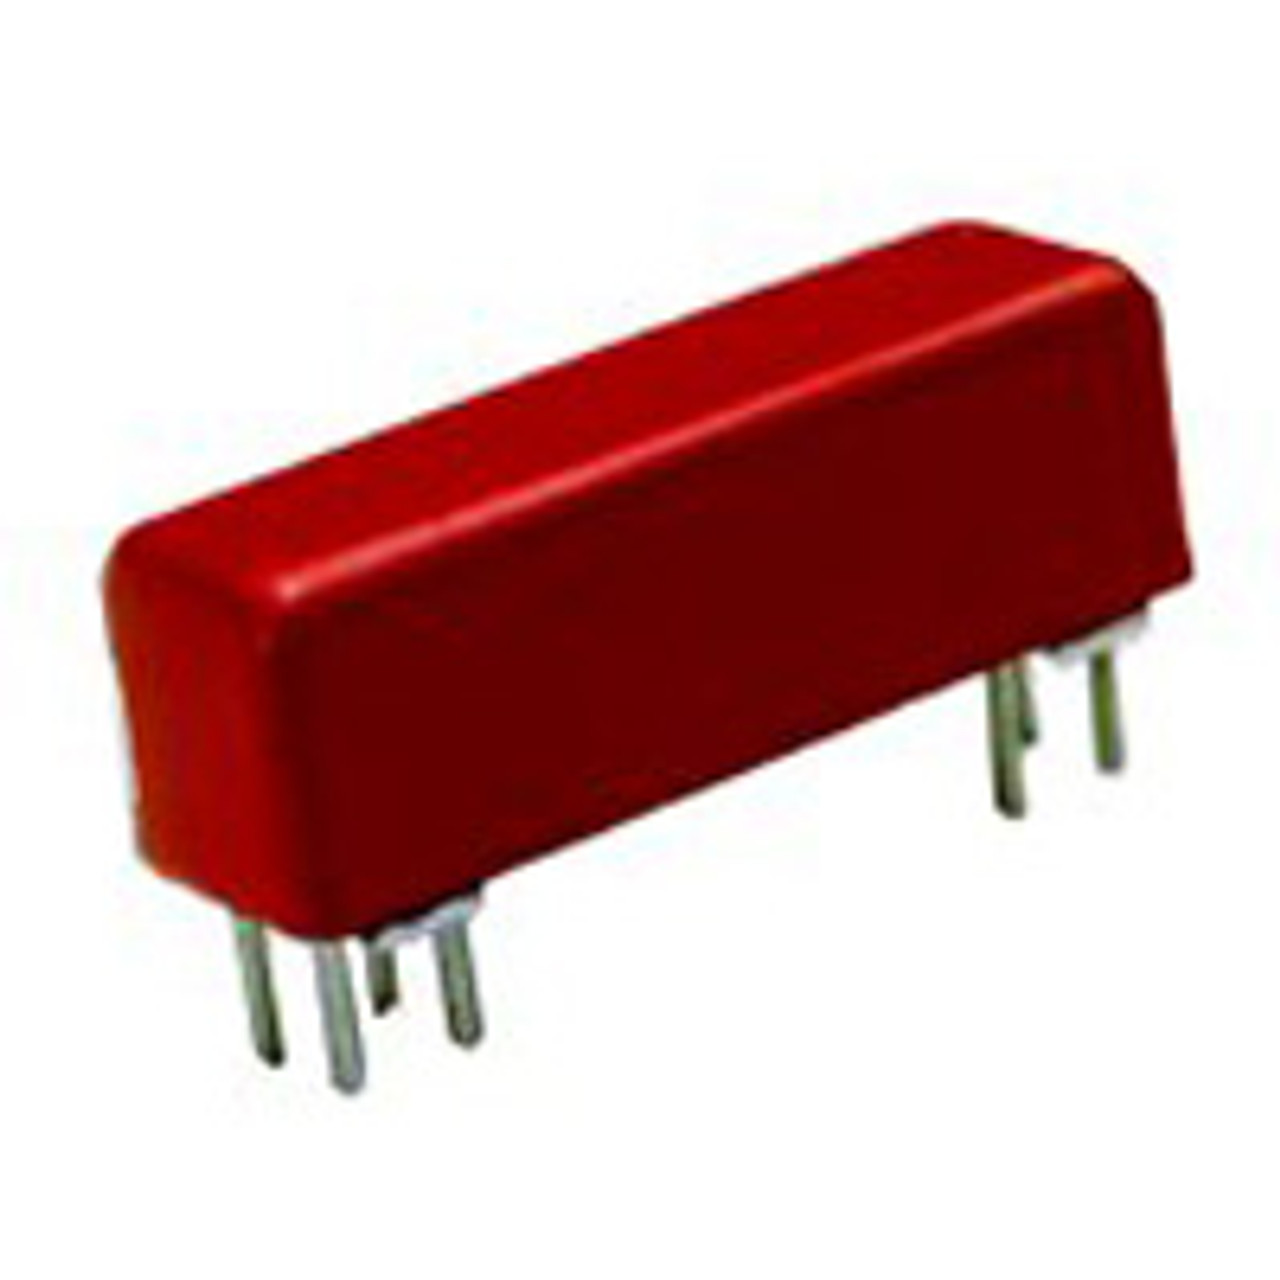 Coto 2900-0010 Reed Relays